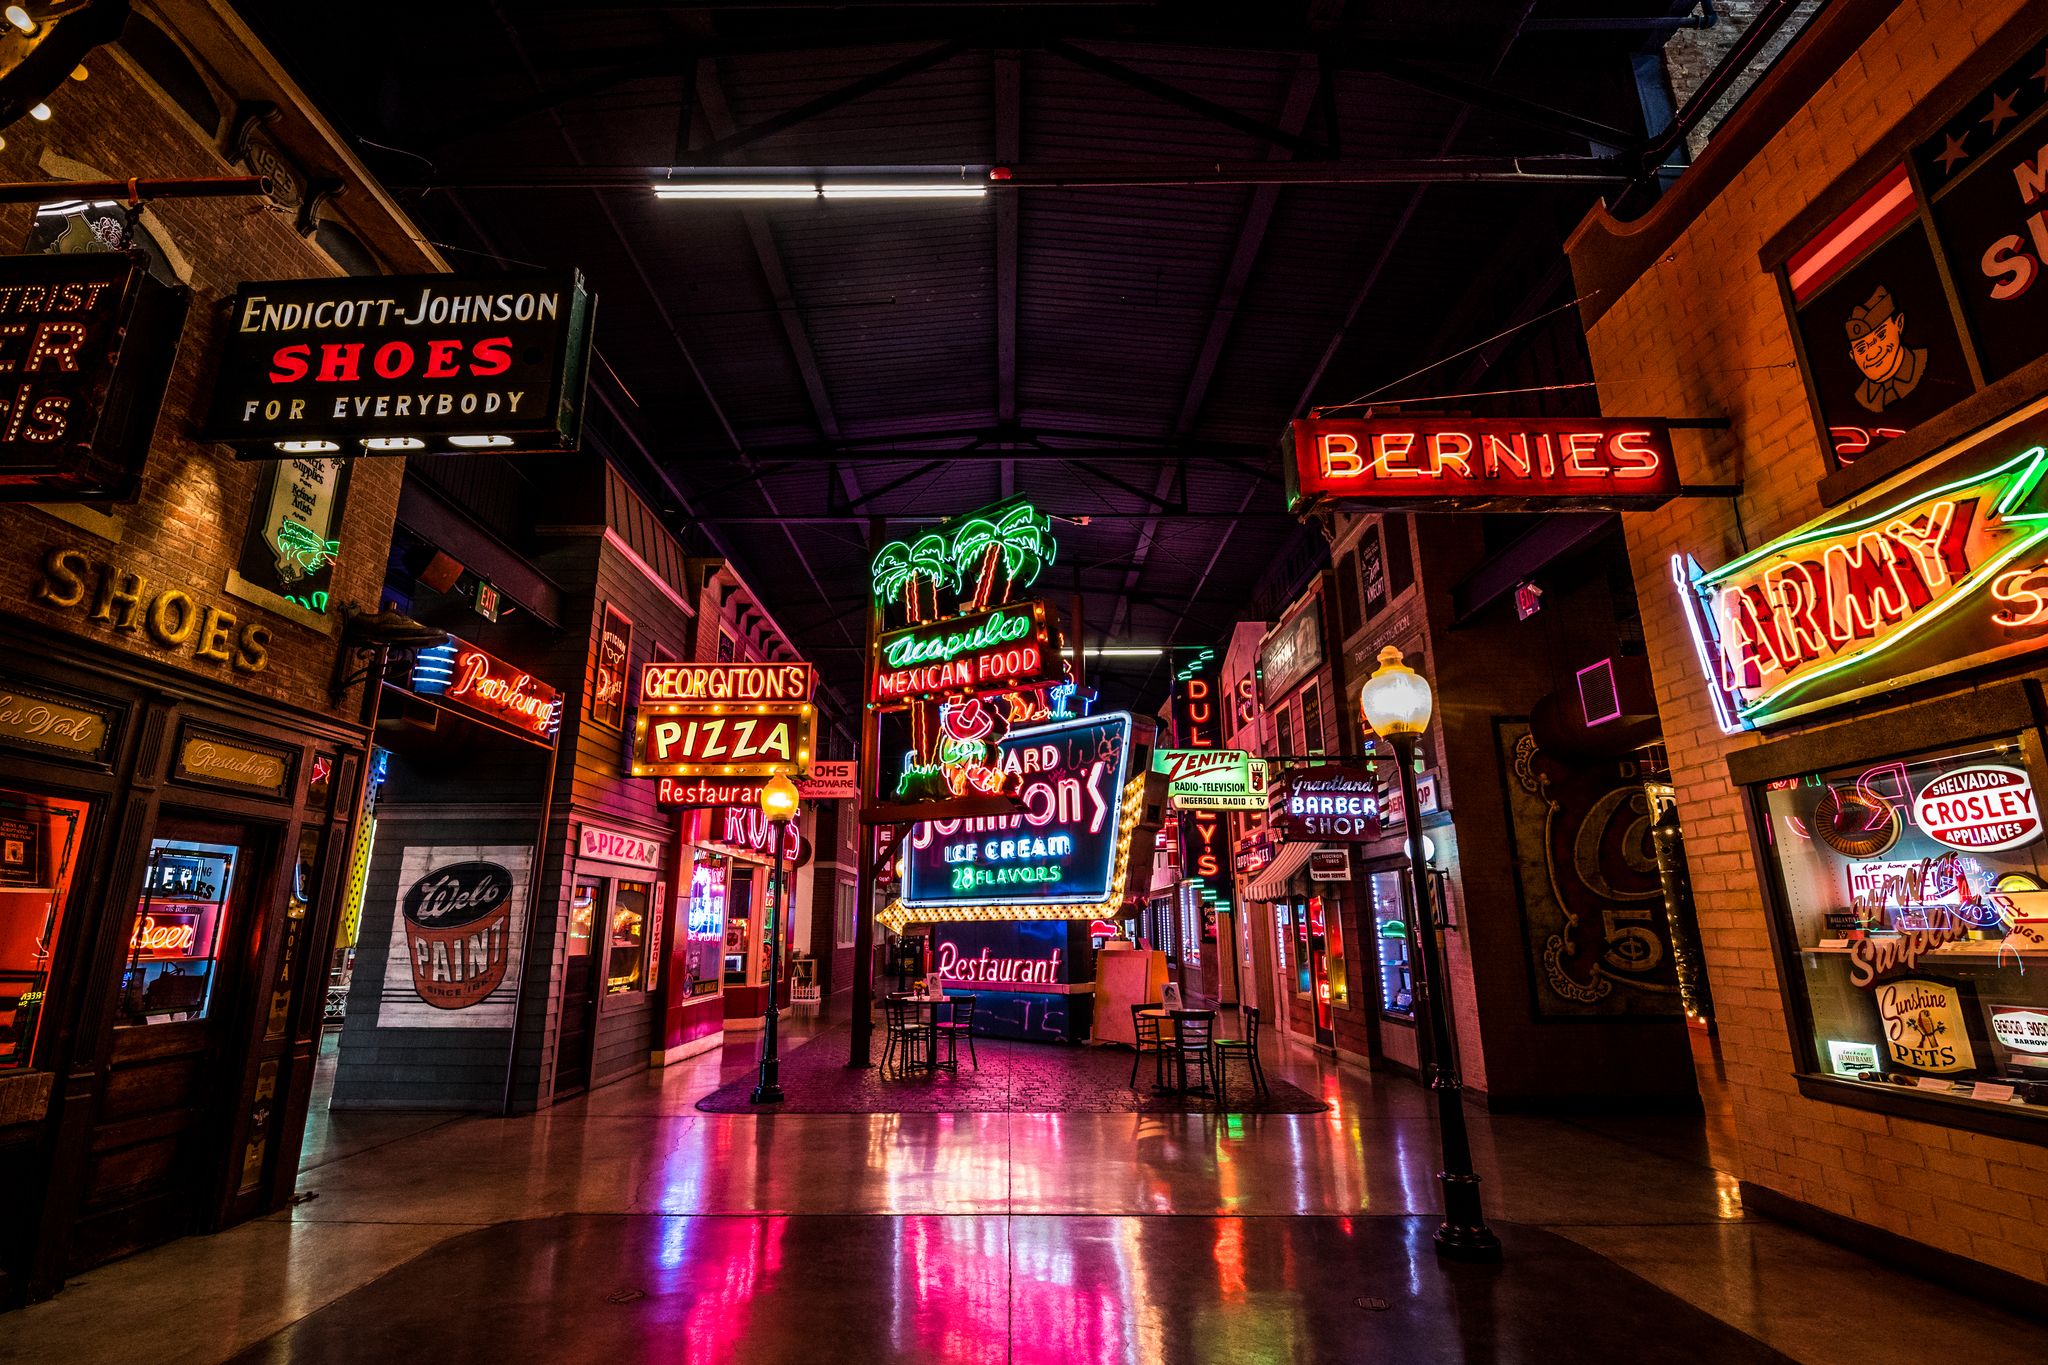 american sign museum is a great place to spend a rainy weekend afternoon in cincinnati